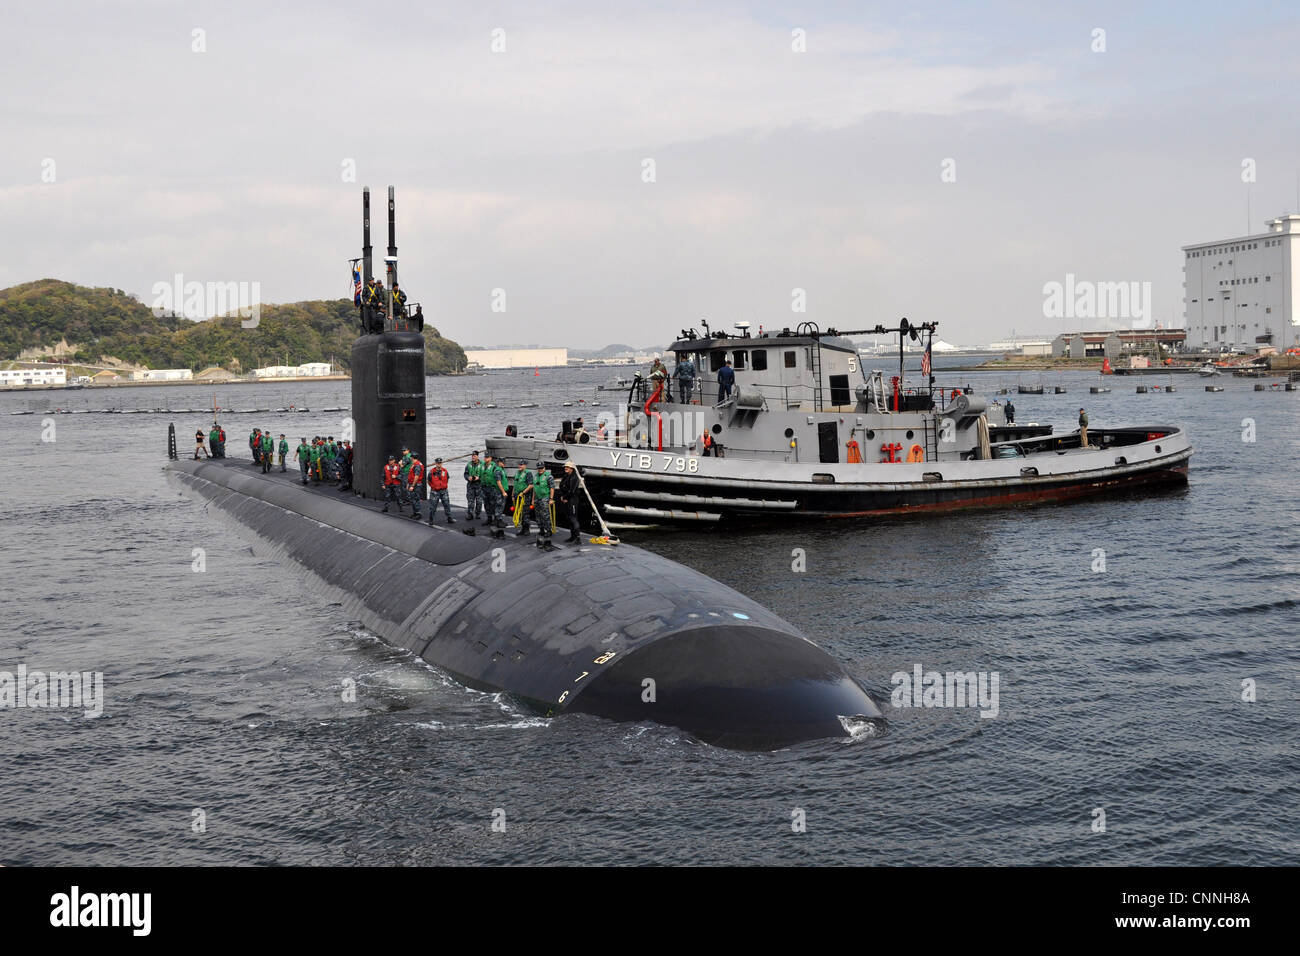 The Los Angeles-class fast attack submarine USS Columbus (SSN 762) arrives at Fleet Activities Yokosuka as part of its deployment to the western Pacific region. Stock Photo